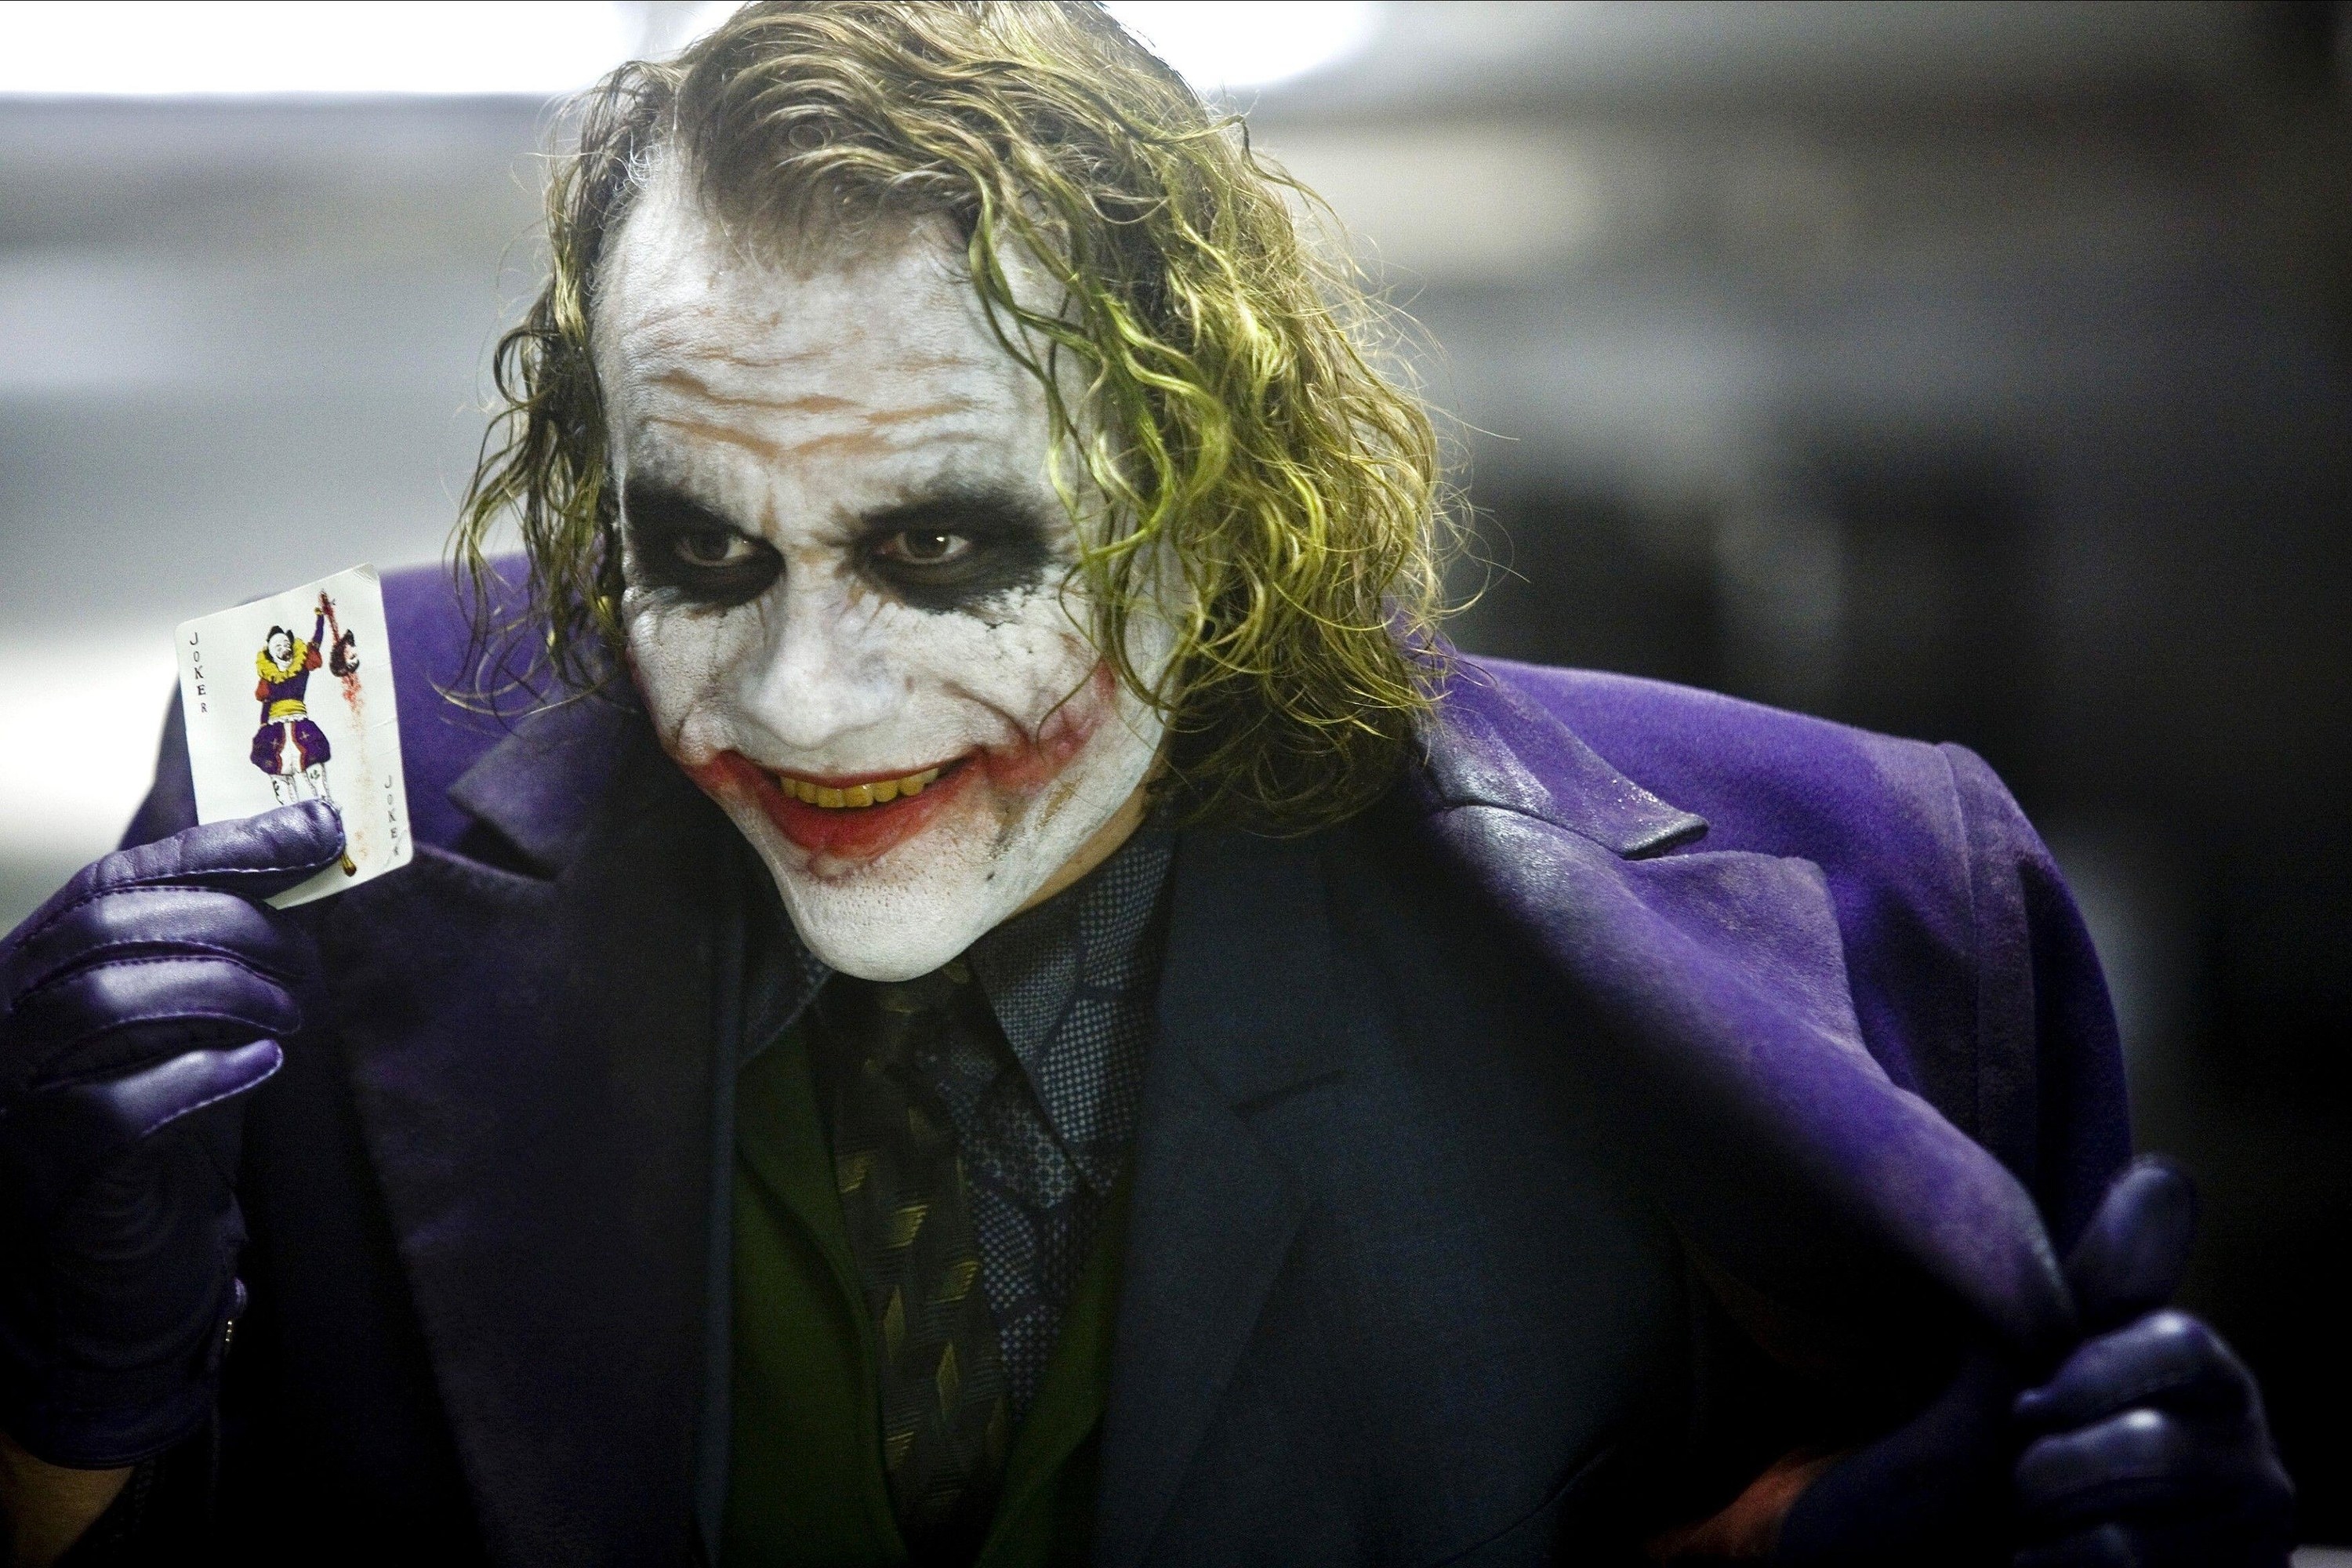 Heath Ledger as the Joker holds up a playing card ominously while holding open his purple jacket